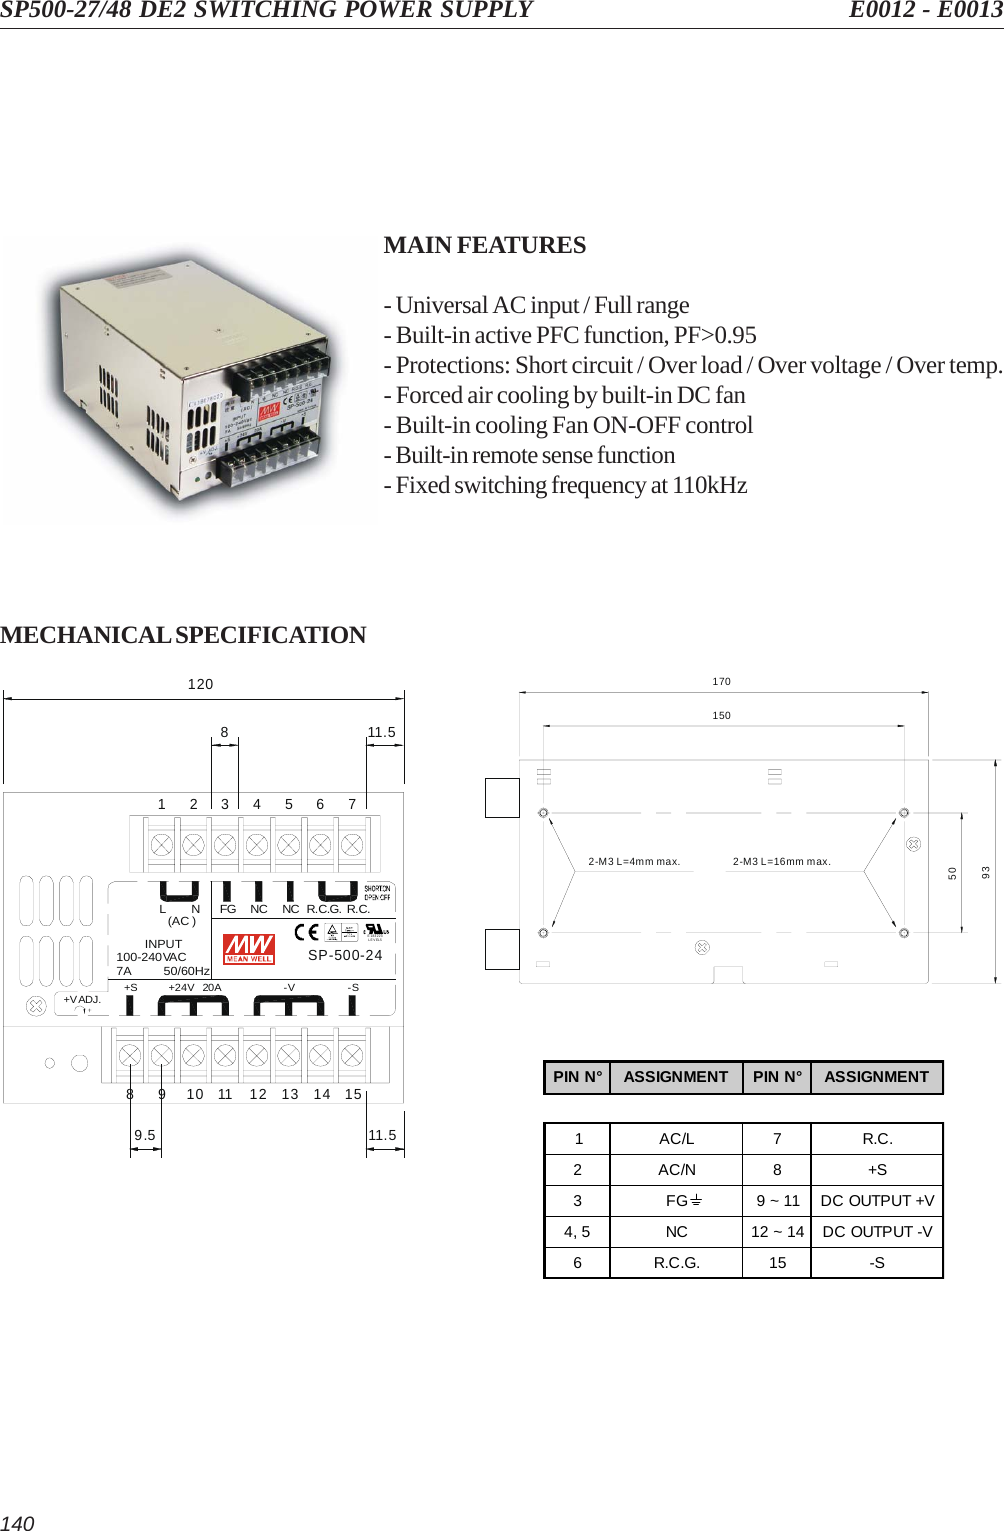 140SP500-27/48 DE2 SWITCHING POWER SUPPLY E0012 - E0013MAIN FEATURES- Universal AC input / Full range- Built-in active PFC function, PF&gt;0.95- Protections: Short circuit / Over load / Over voltage / Over temp.- Forced air cooling by built-in DC fan- Built-in cooling Fan ON-OFF control- Built-in remote sense function- Fixed switching frequency at 110kHzMECHANICAL SPECIFICATION17015050932-M3 L=16mm max.2-M3 L=4mm max.9.5 11.5811.51201514131211109876543217A 50/60Hz100-240VACINPUT(AC )-S-V+24V   20A+S+VADJ.SP-500-24E183223LEVEL5R.C.G.L N FG NC NC R.C.PIN N° ASSIGNMENT PIN N° ASSIGNMENT1 AC/L 7 R.C.2AC/N8 +S3 FG 9 ~ 11 DC OUTPUT +V4, 5 NC 12 ~ 14 DC OUTPUT -V6R.C.G.15 -S